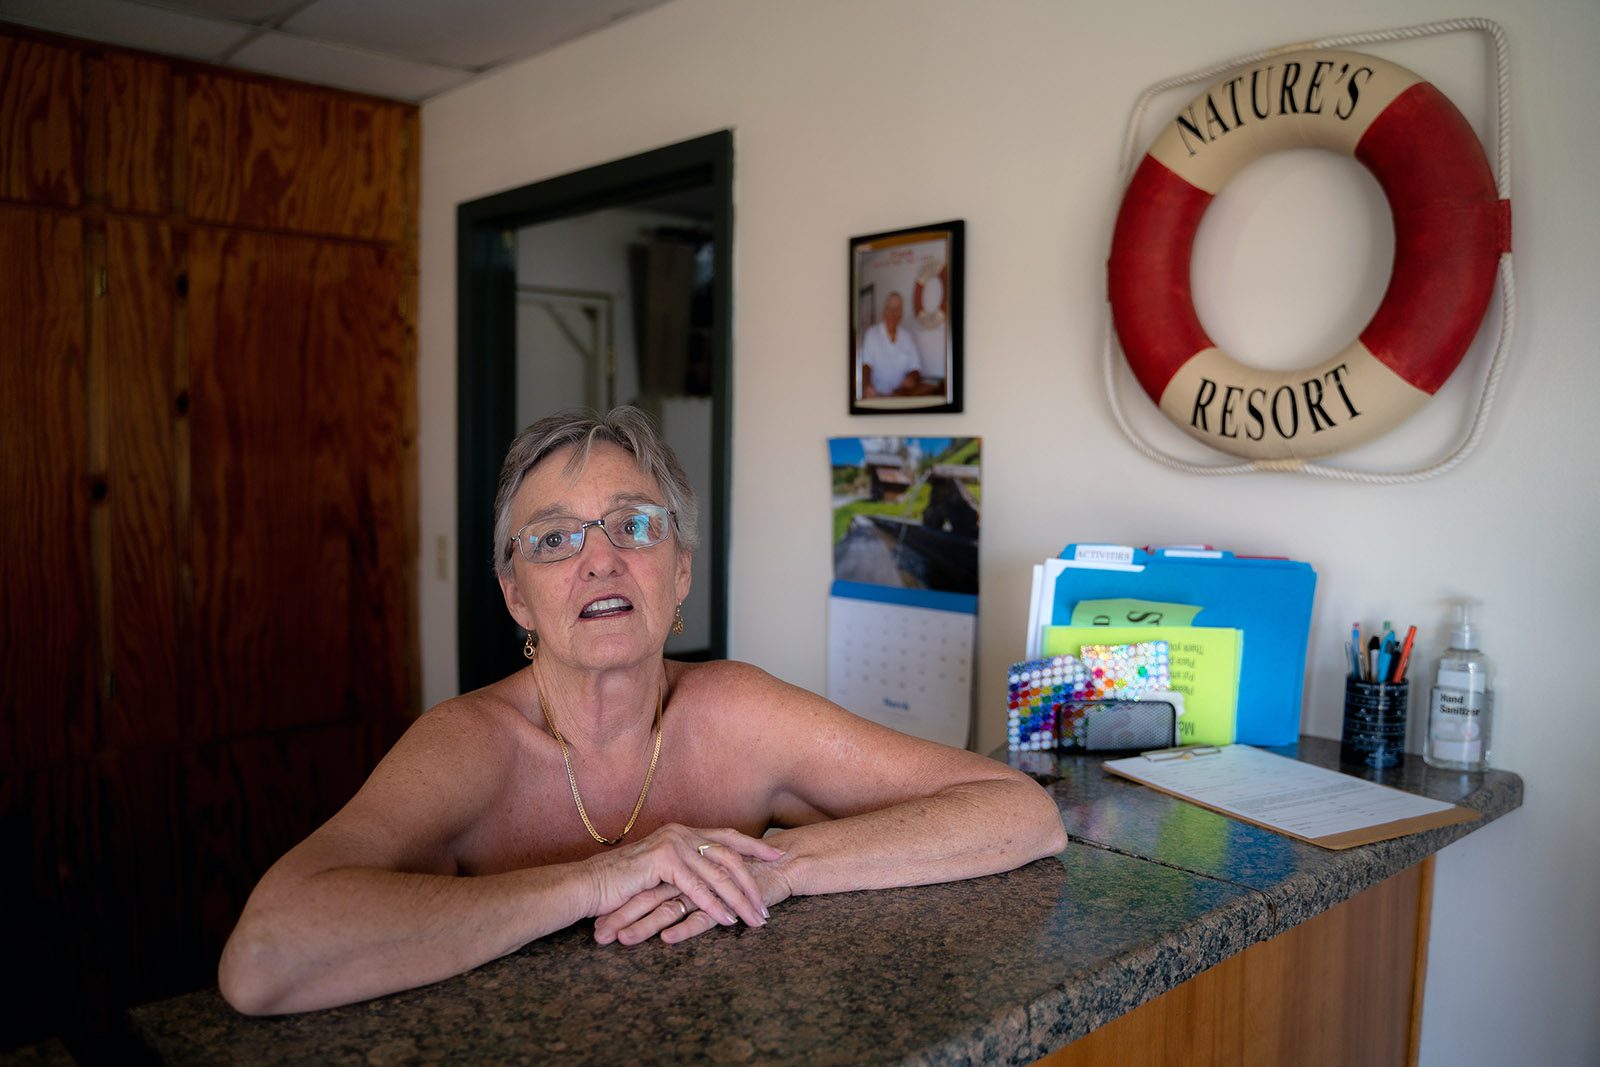 Misty Katz stands at the front desk of Nature's Resort in Elsa, Texas. Photo by Jeremy Lindenfeld